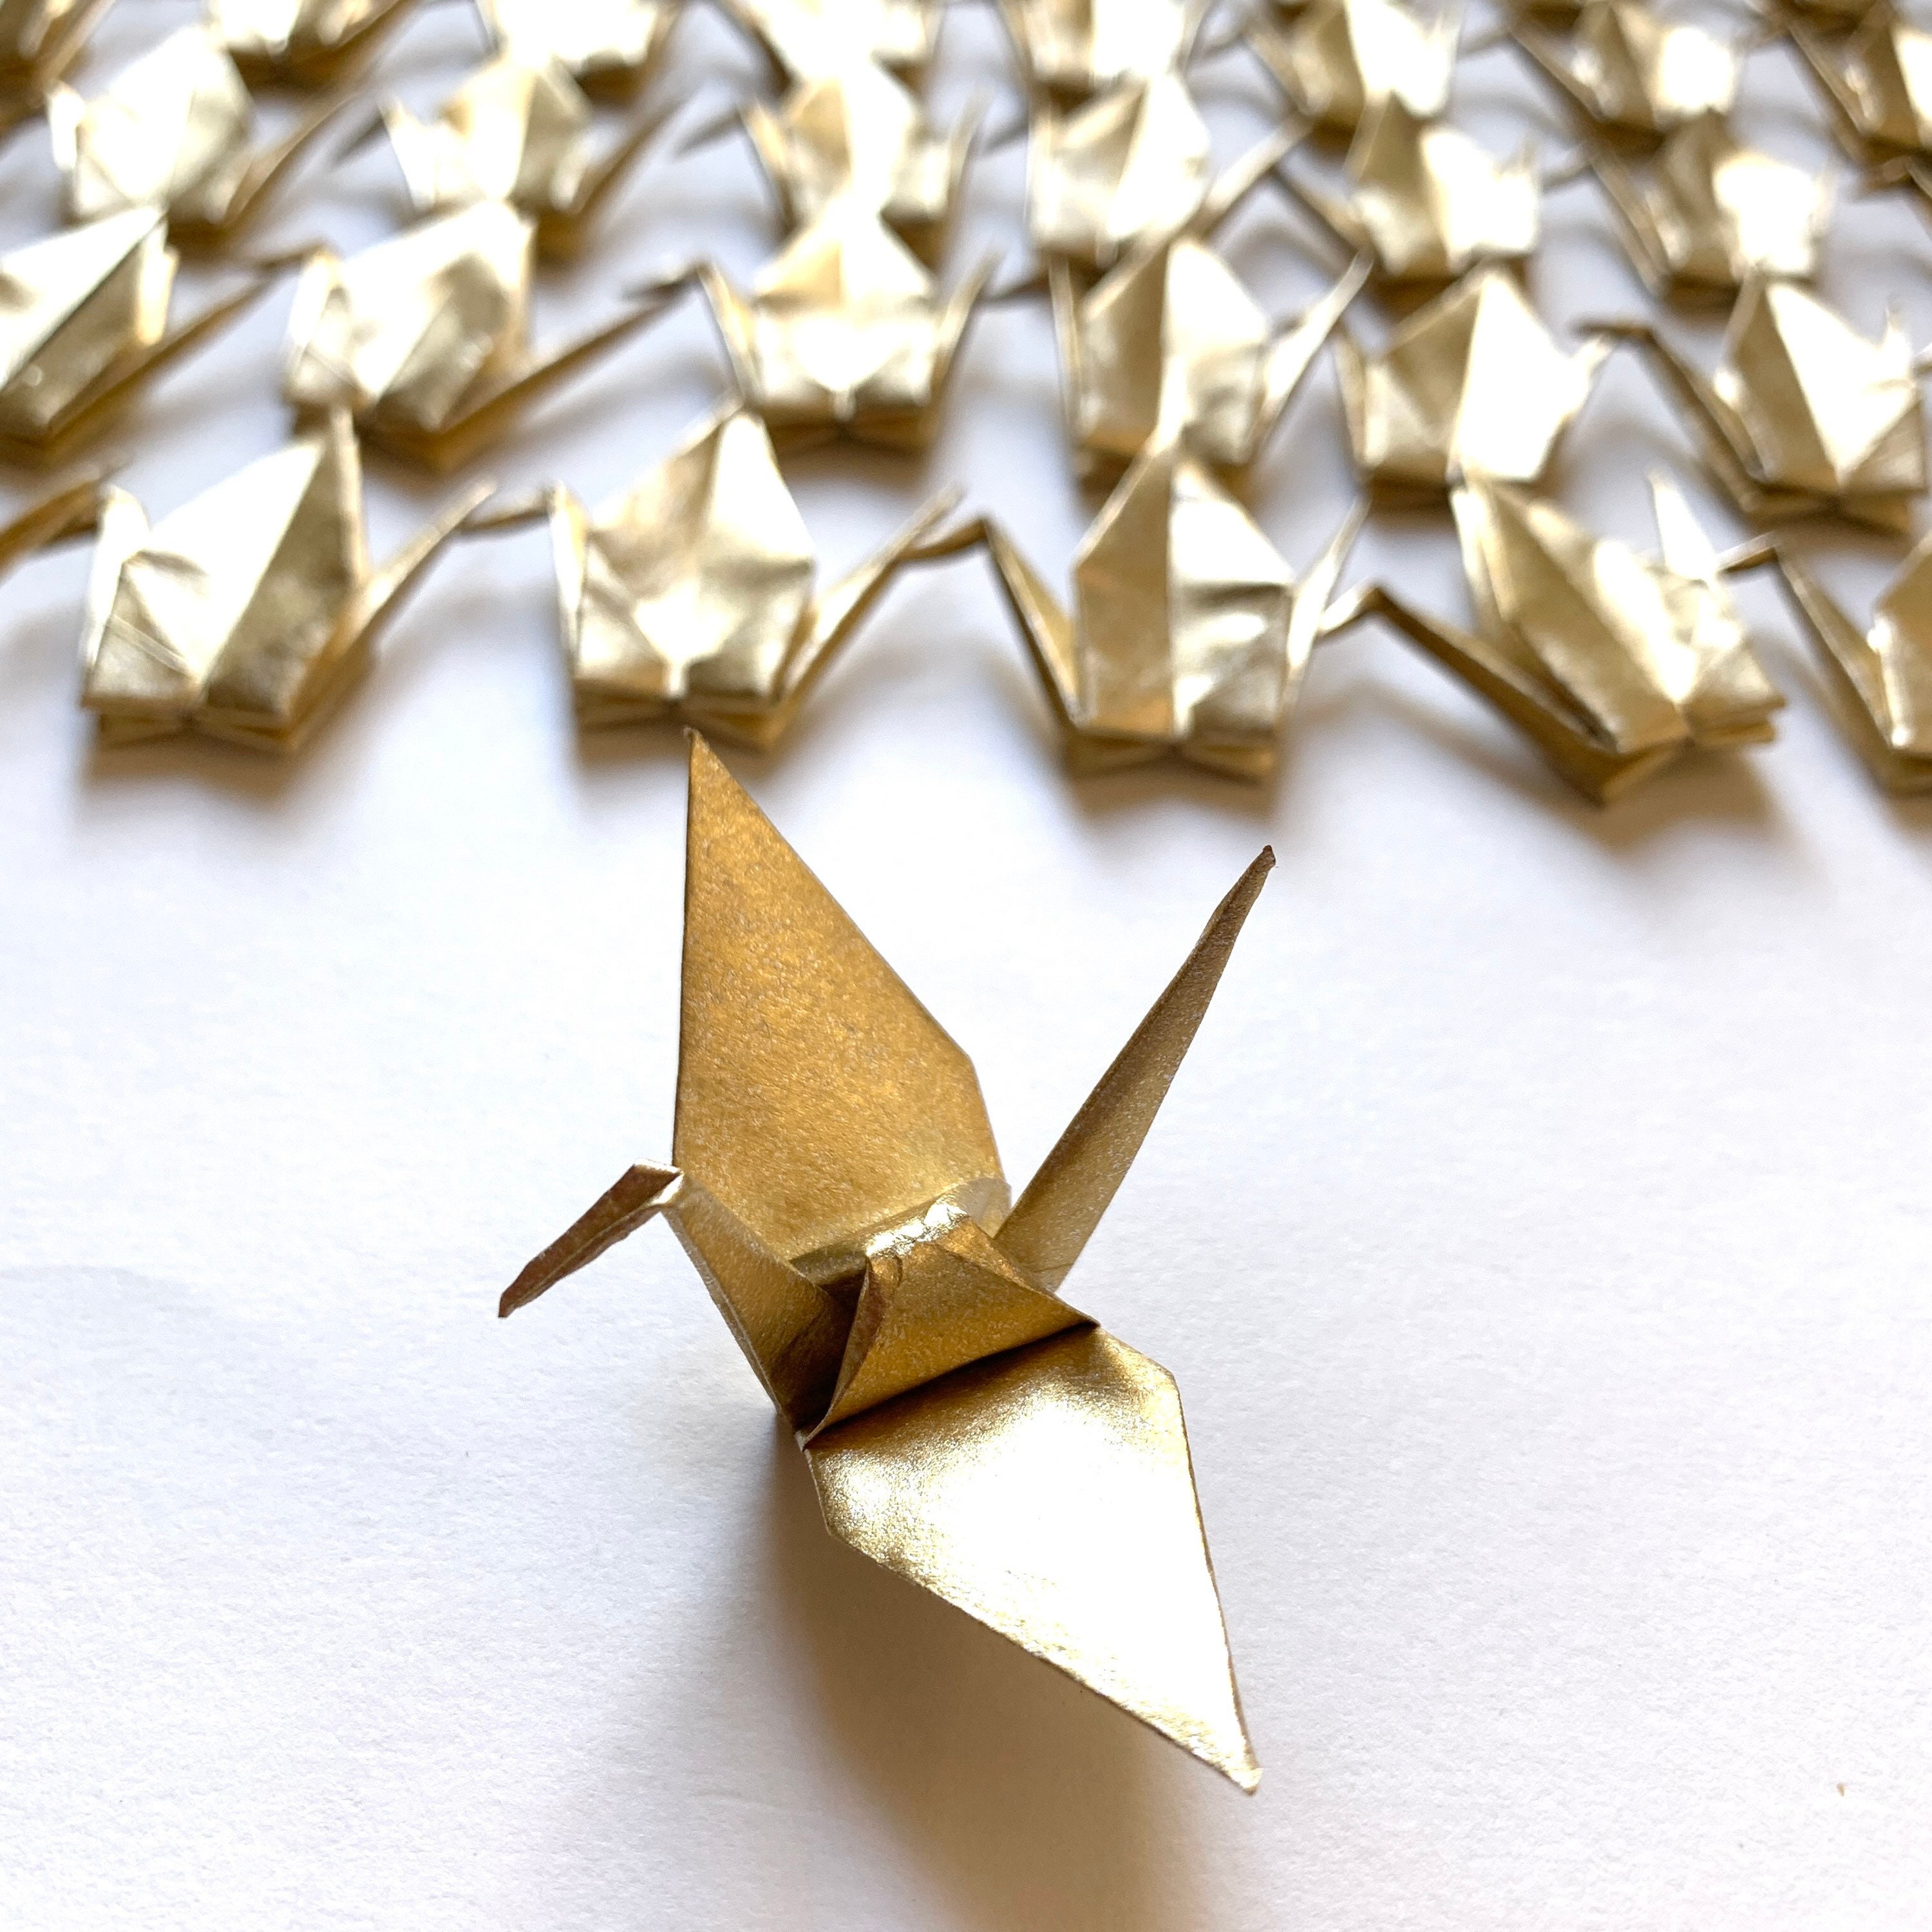 100 Origami Paper Sheets Paper Pack Gold Origami Paper Cranes 6x6 Inches for Folding Paper , Origami Cranes , Origami Decoration,DIY (Gold-cloud-6x6)